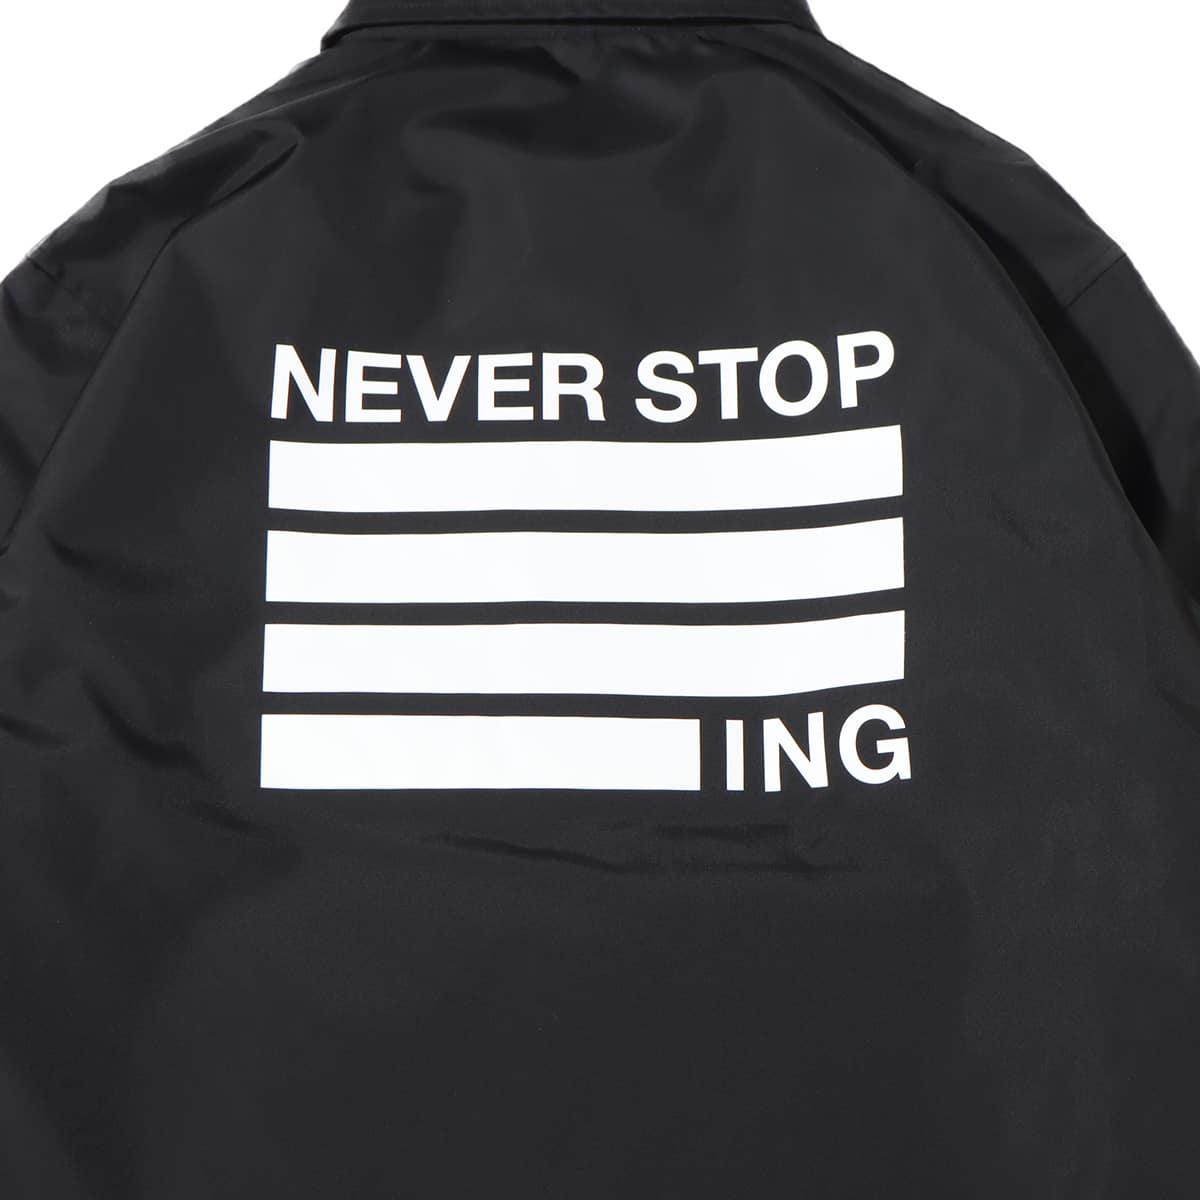 THE NORTH FACE NEVER STOP ING THE COACH JACKET BLACK 23FW-I